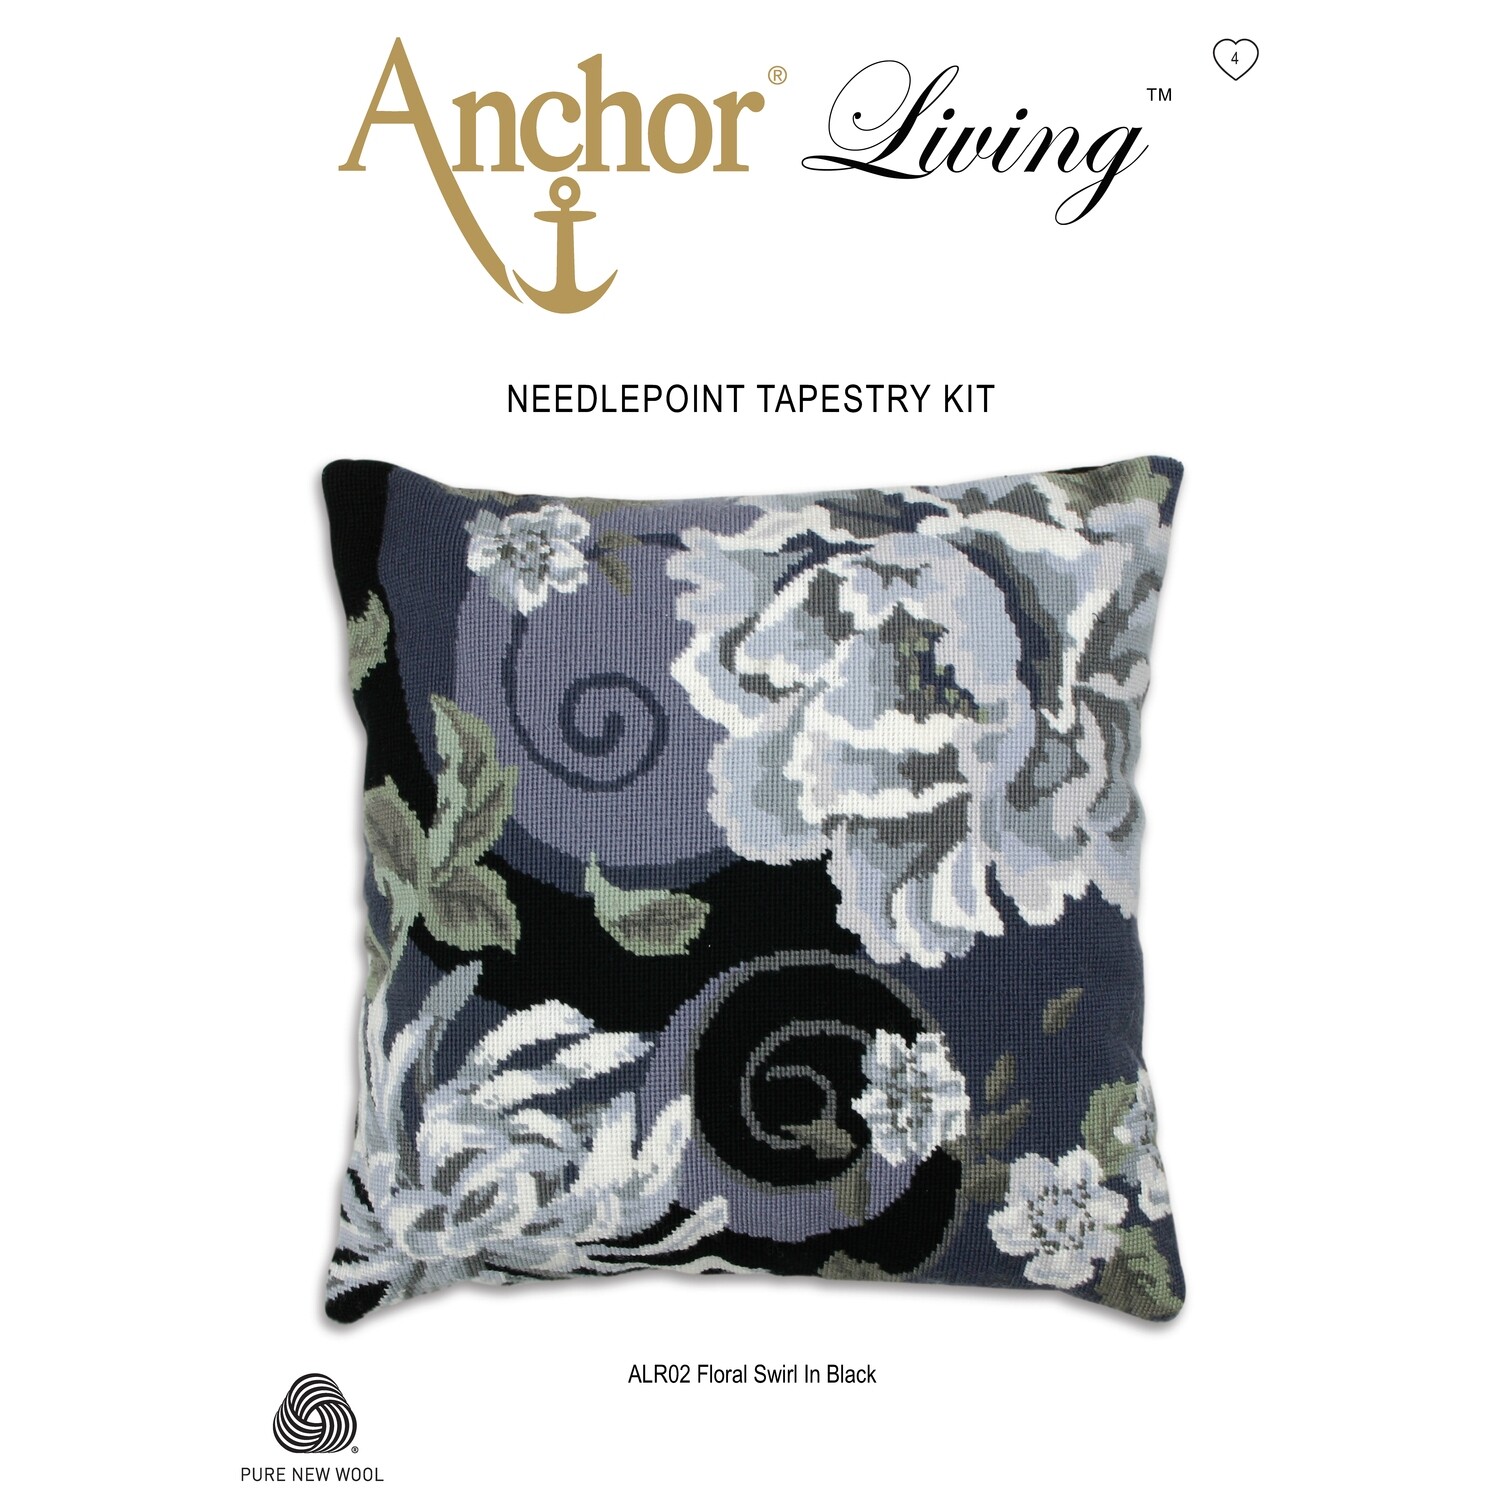 Anchor Living Tapestry Kit - Tapestry Floral Swirl in Black Cushion